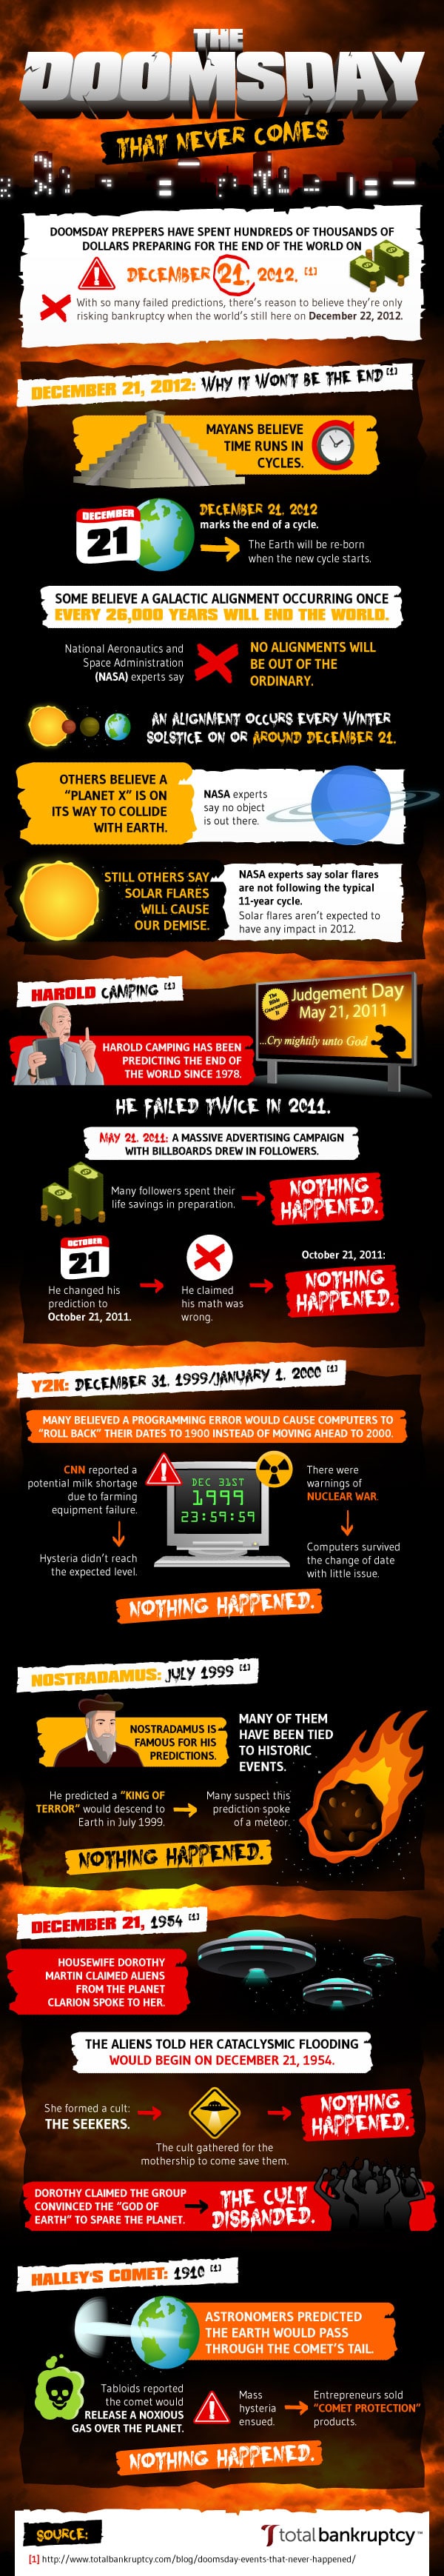 We’re Alive! Why The Doomsday Prediction Was False [Infographic]